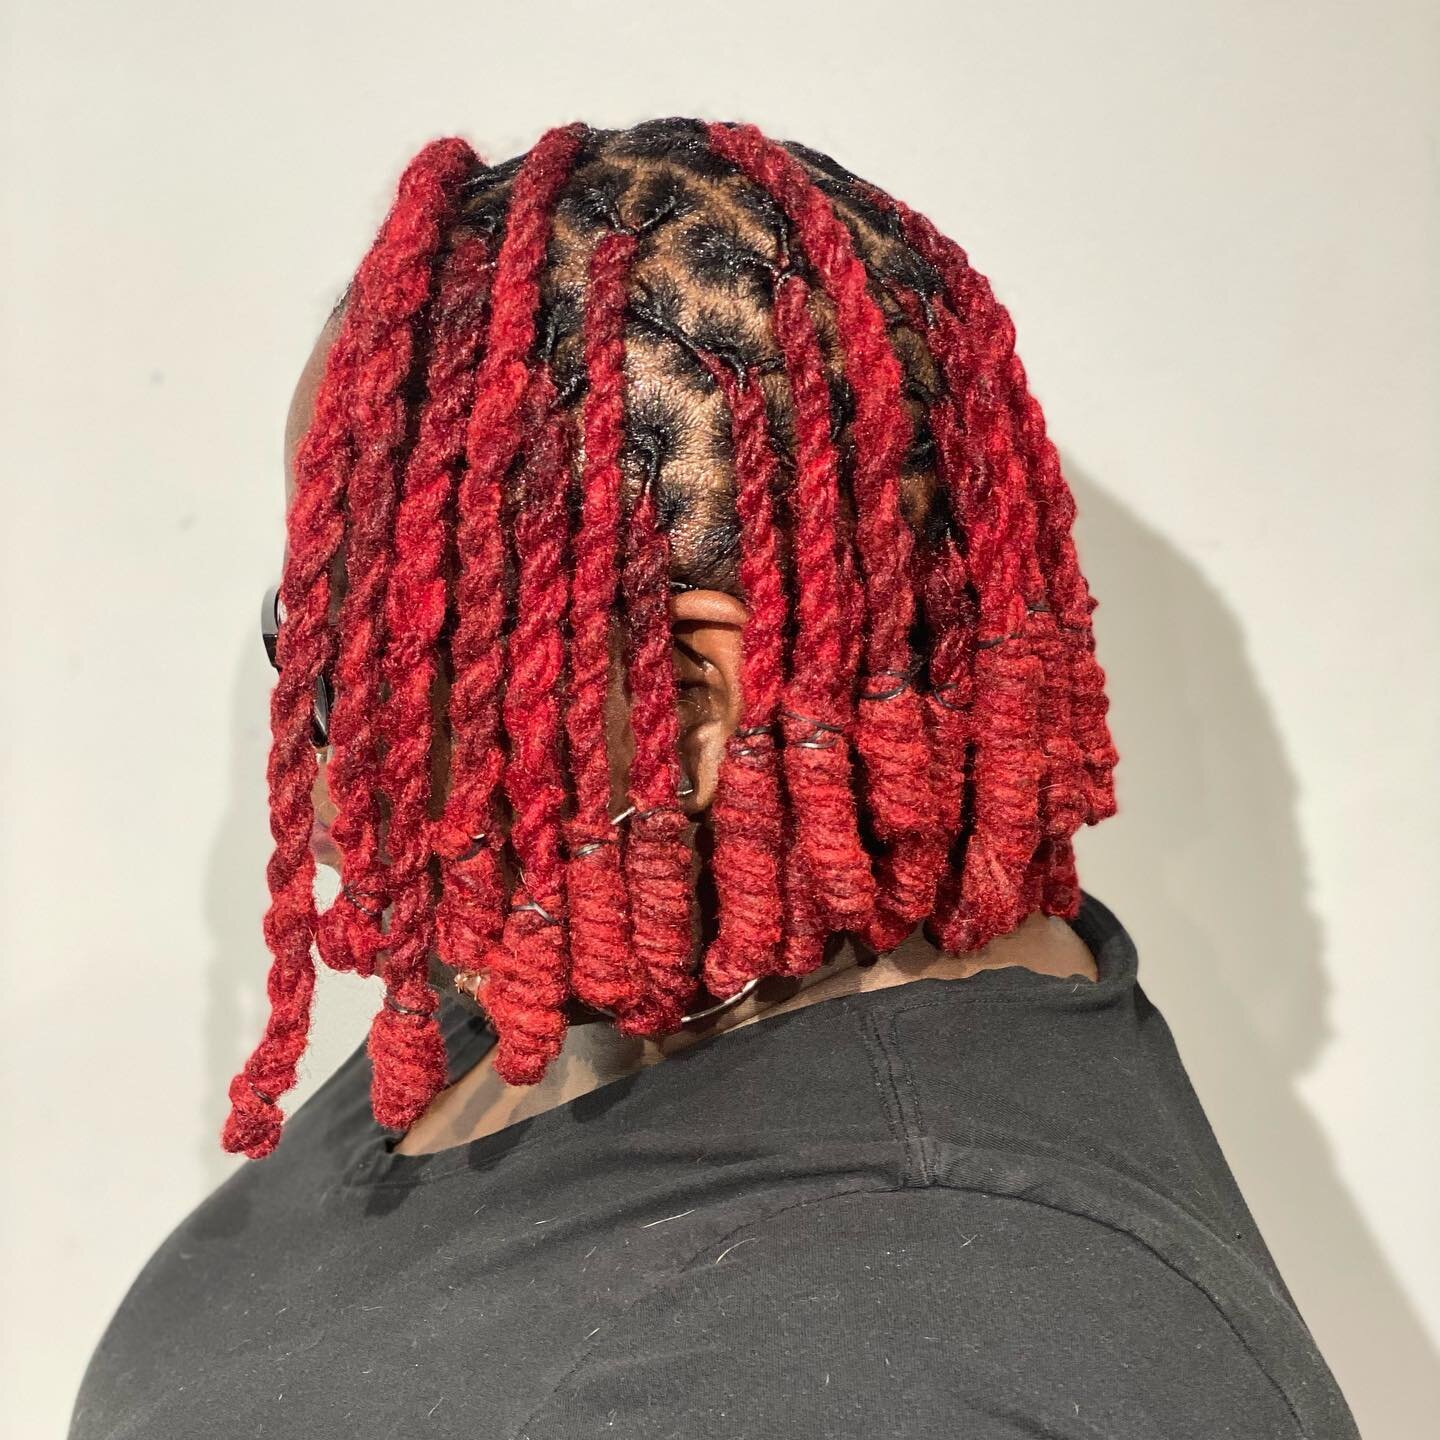 I&rsquo;m obsessed with these loc knots! Cute and versatile and another style once it&rsquo;s taken down. Schedule your appointment today 

#locs #stllocs #naturalhair #naturalhairstylist #redlocs #locknots #stl #healthyhair #webstergroves #theblvdha